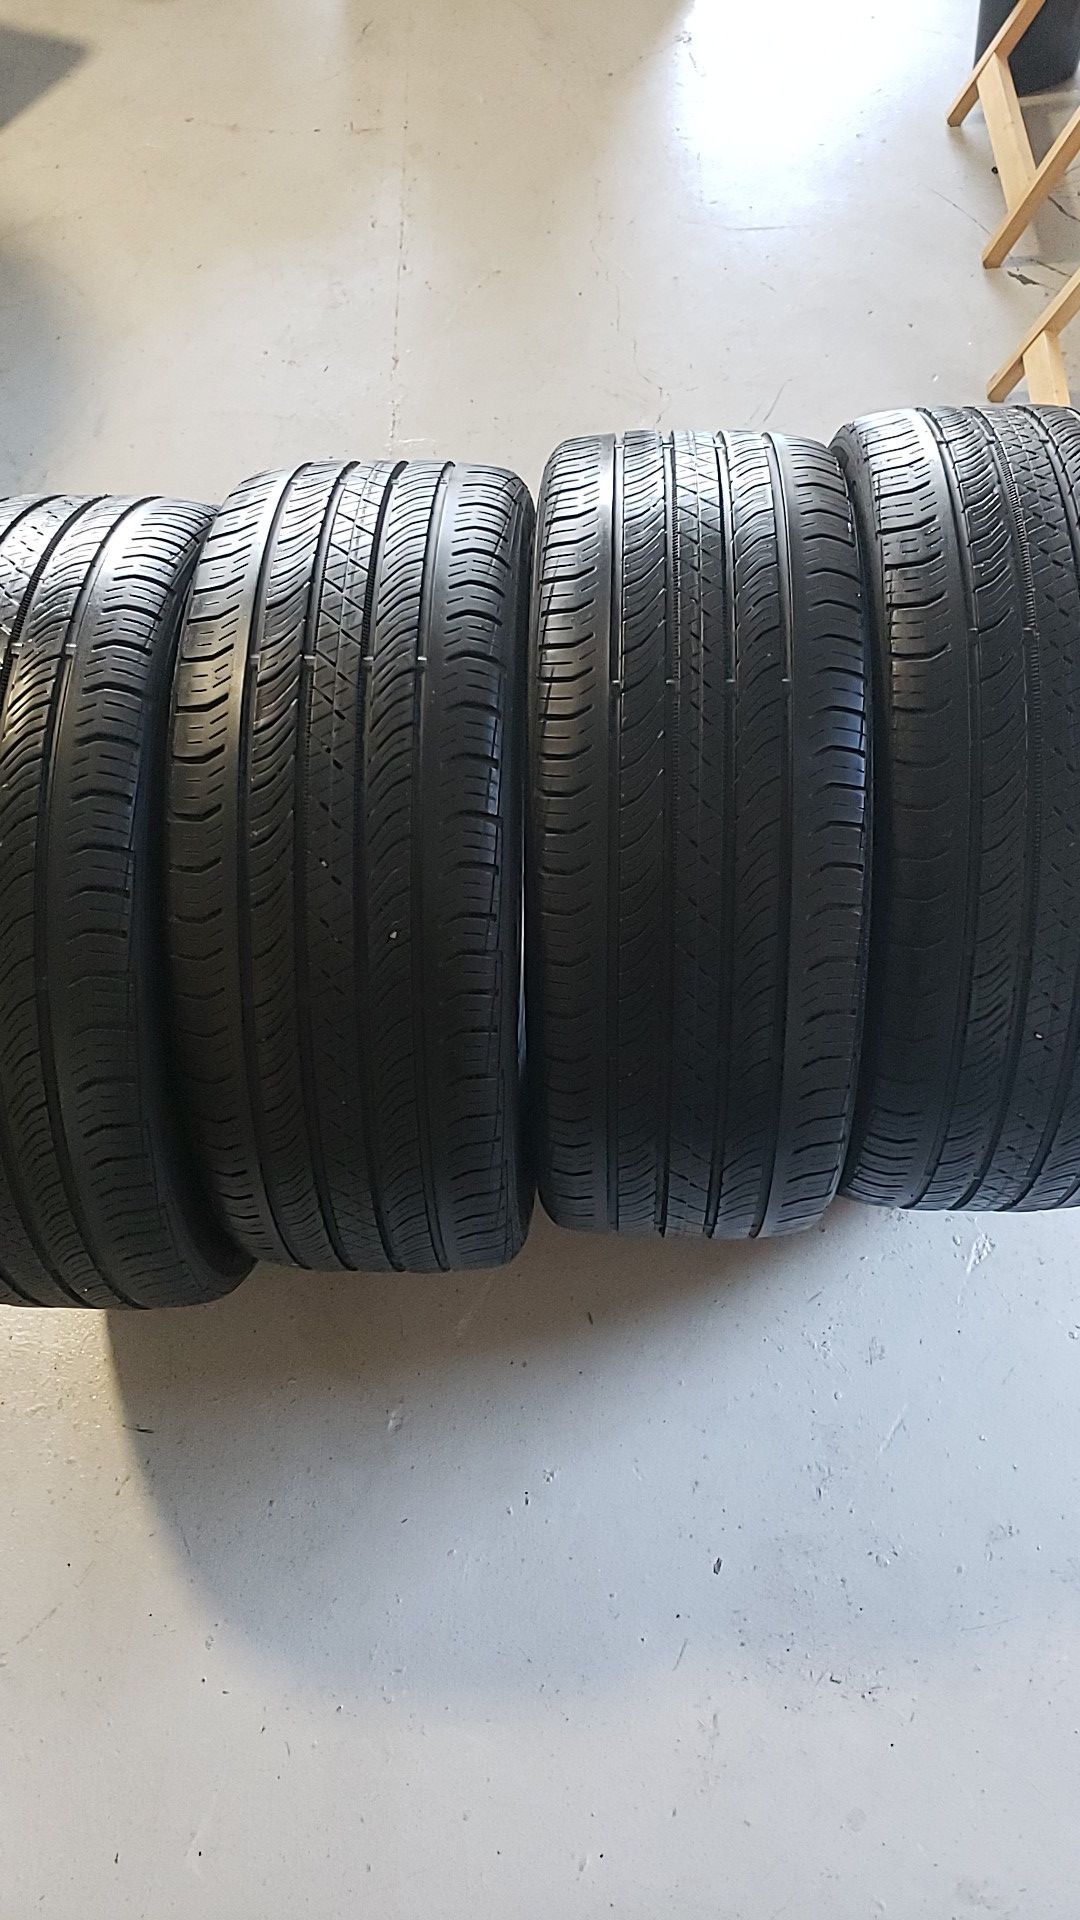 Continental in good condition 4 tires 225 45 17 70% tread